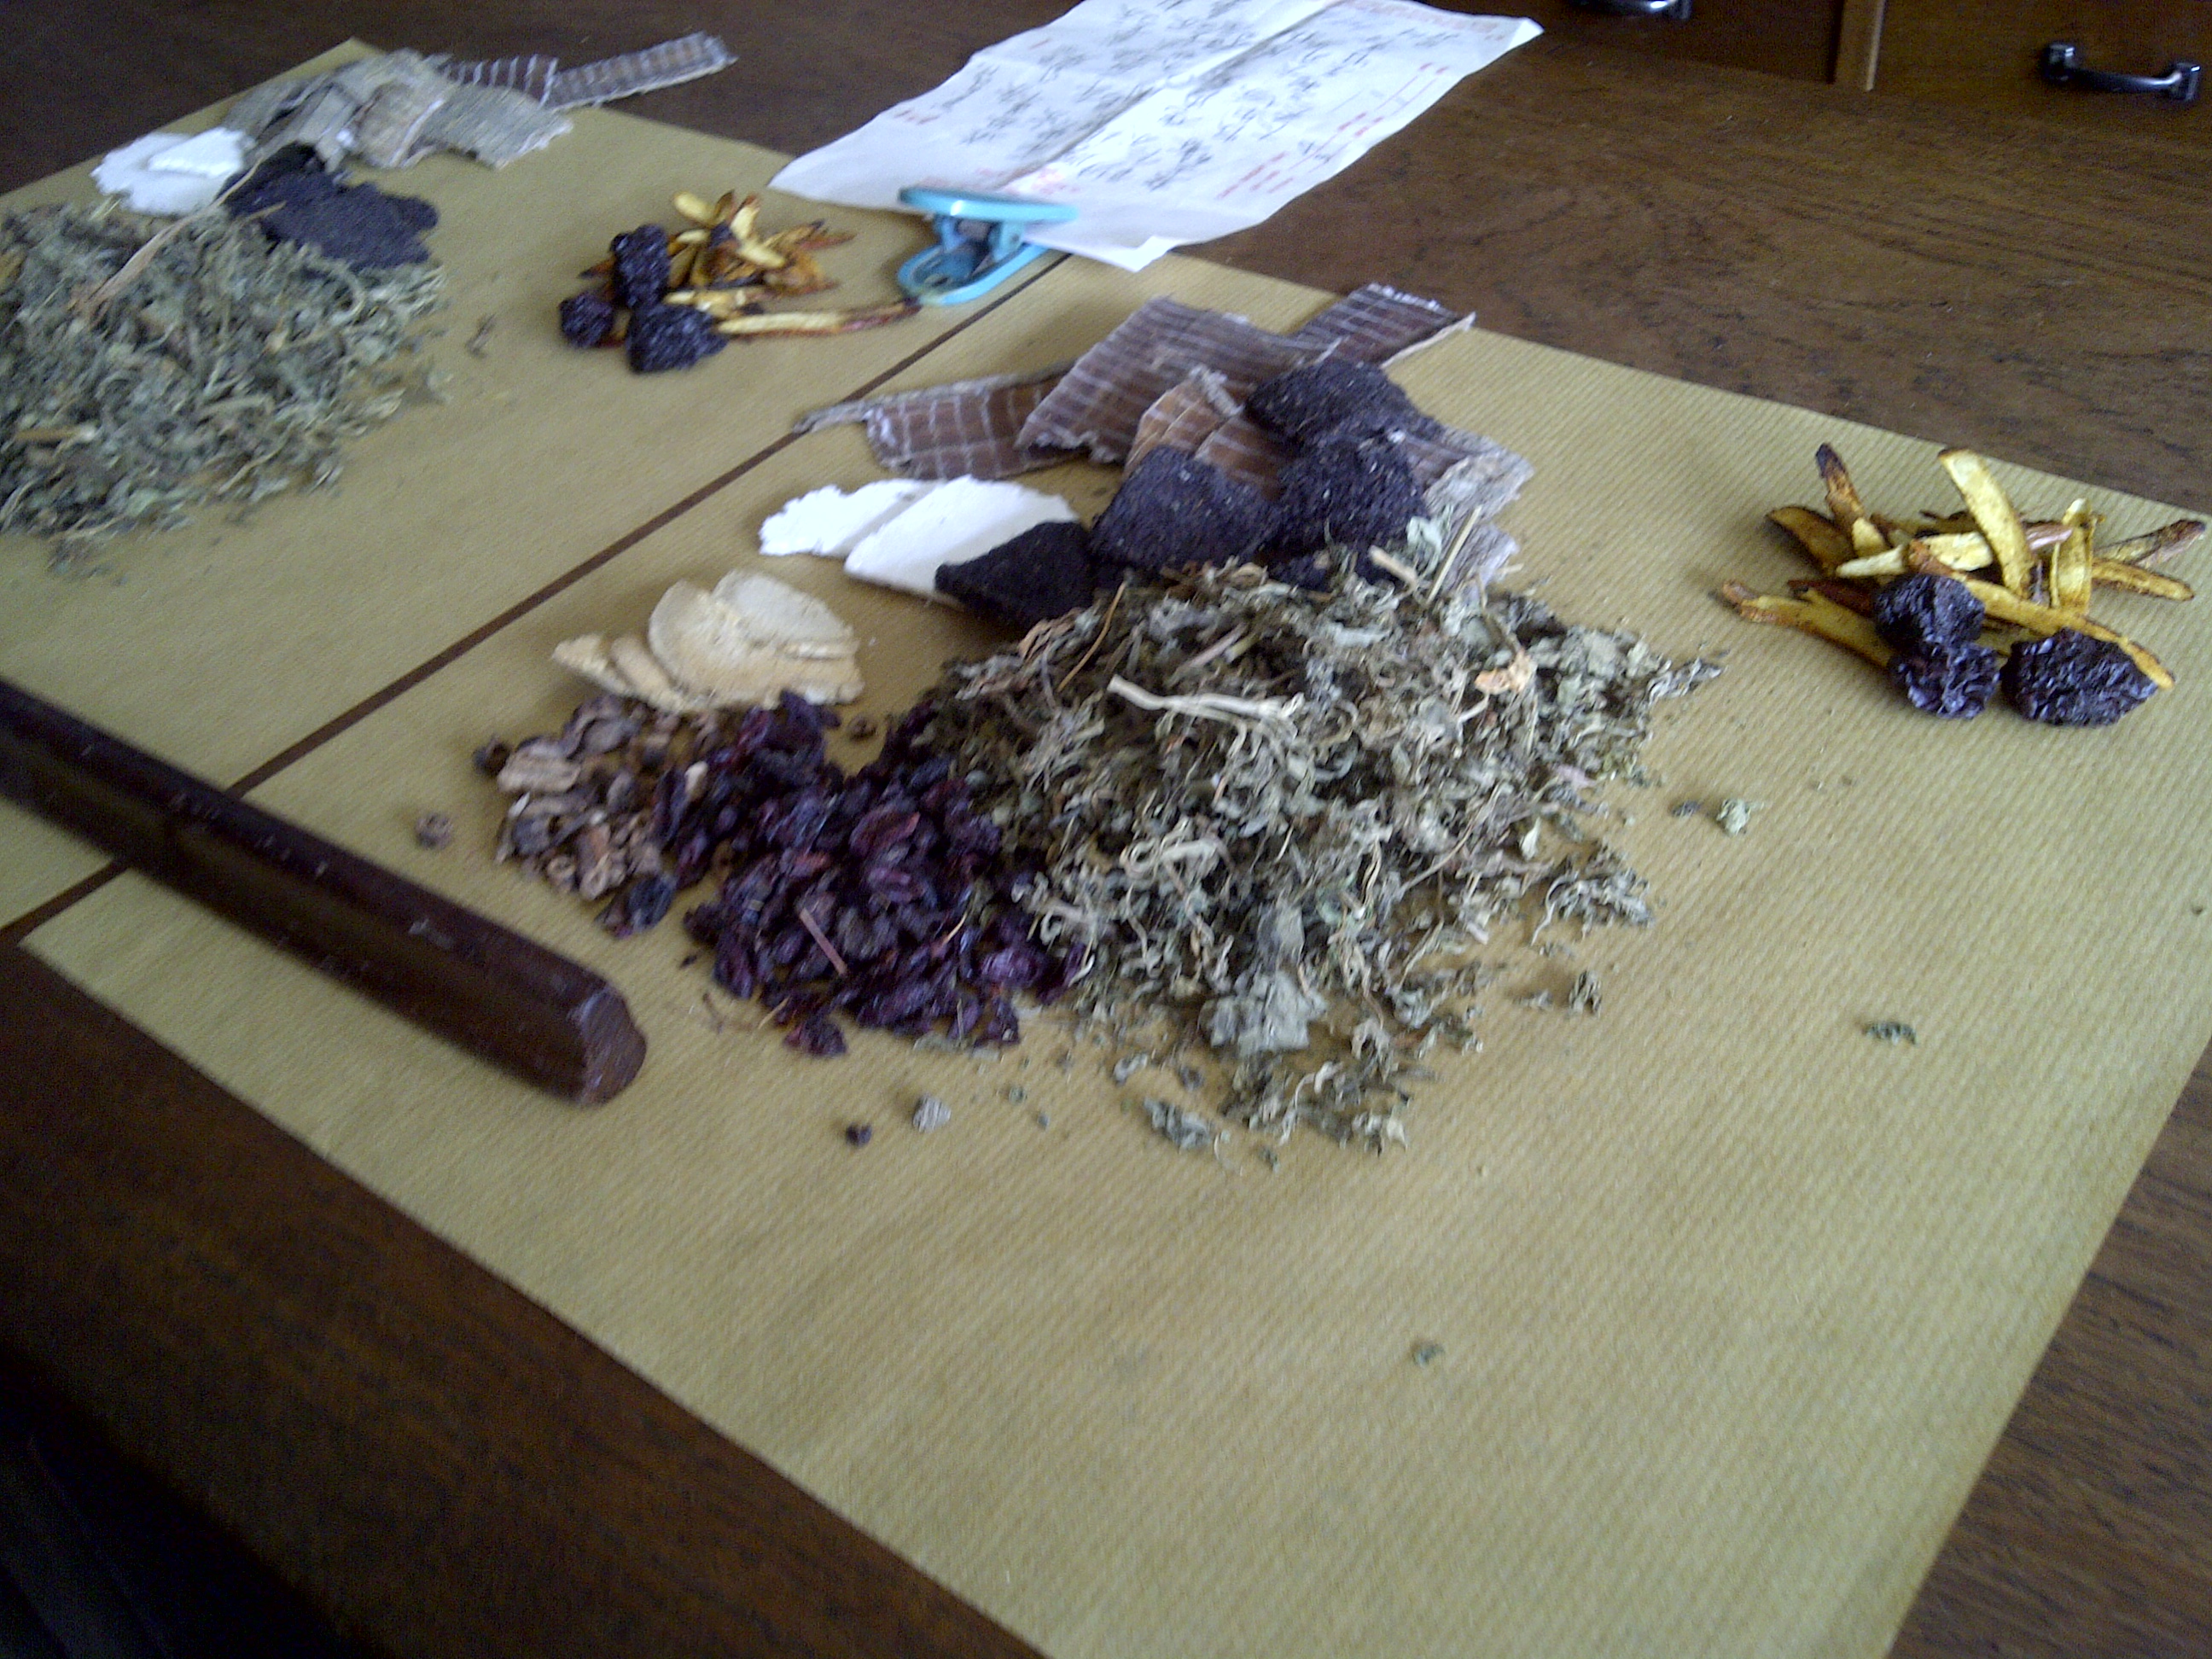 Chinese traditional medicine